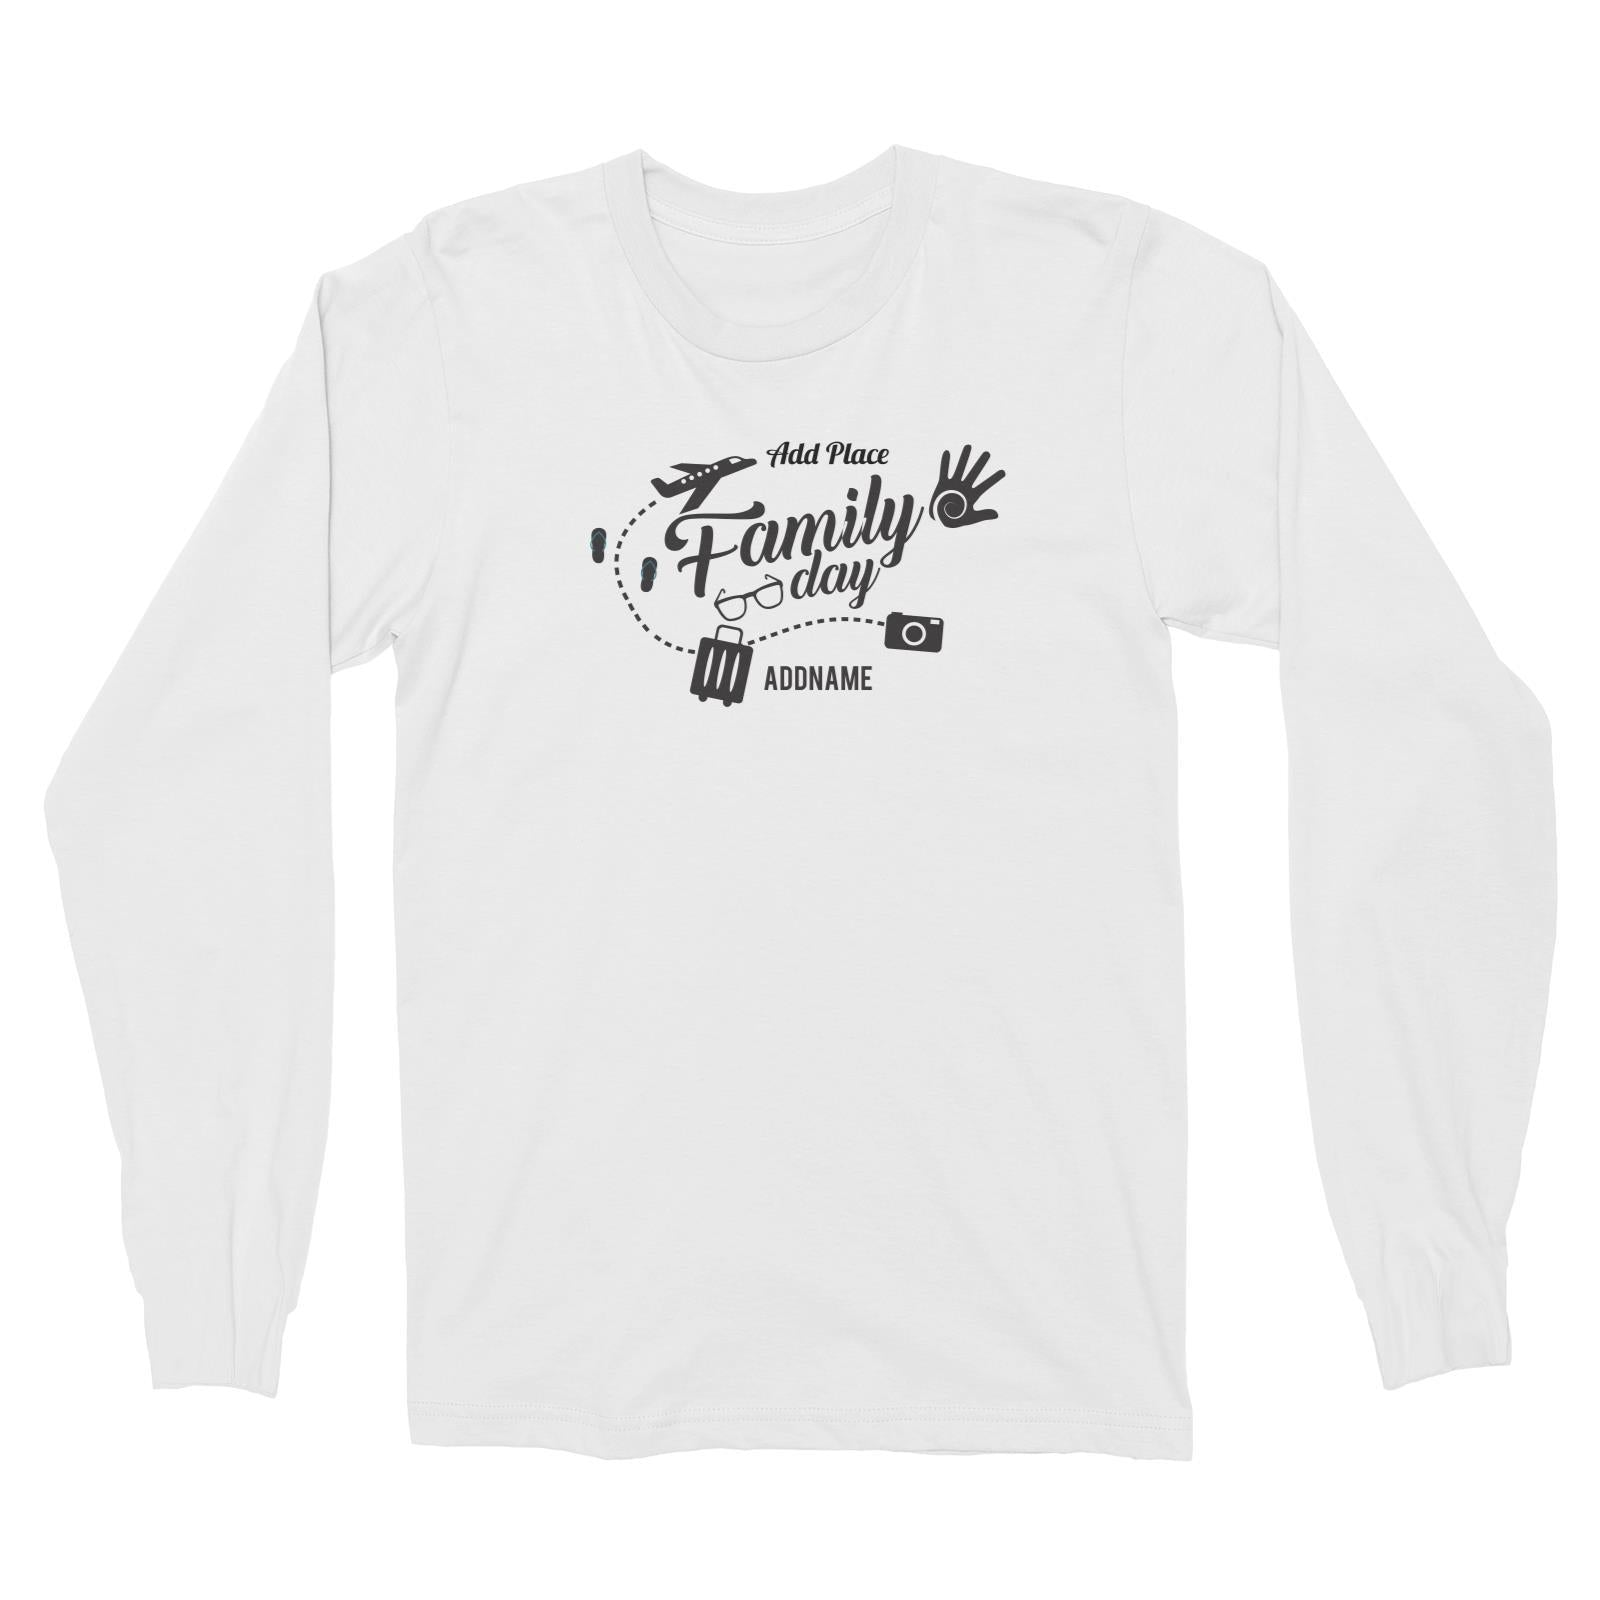 Family Day Flight Vacation Icon Family Day Addname And Add Place Long Sleeve Unisex T-Shirt